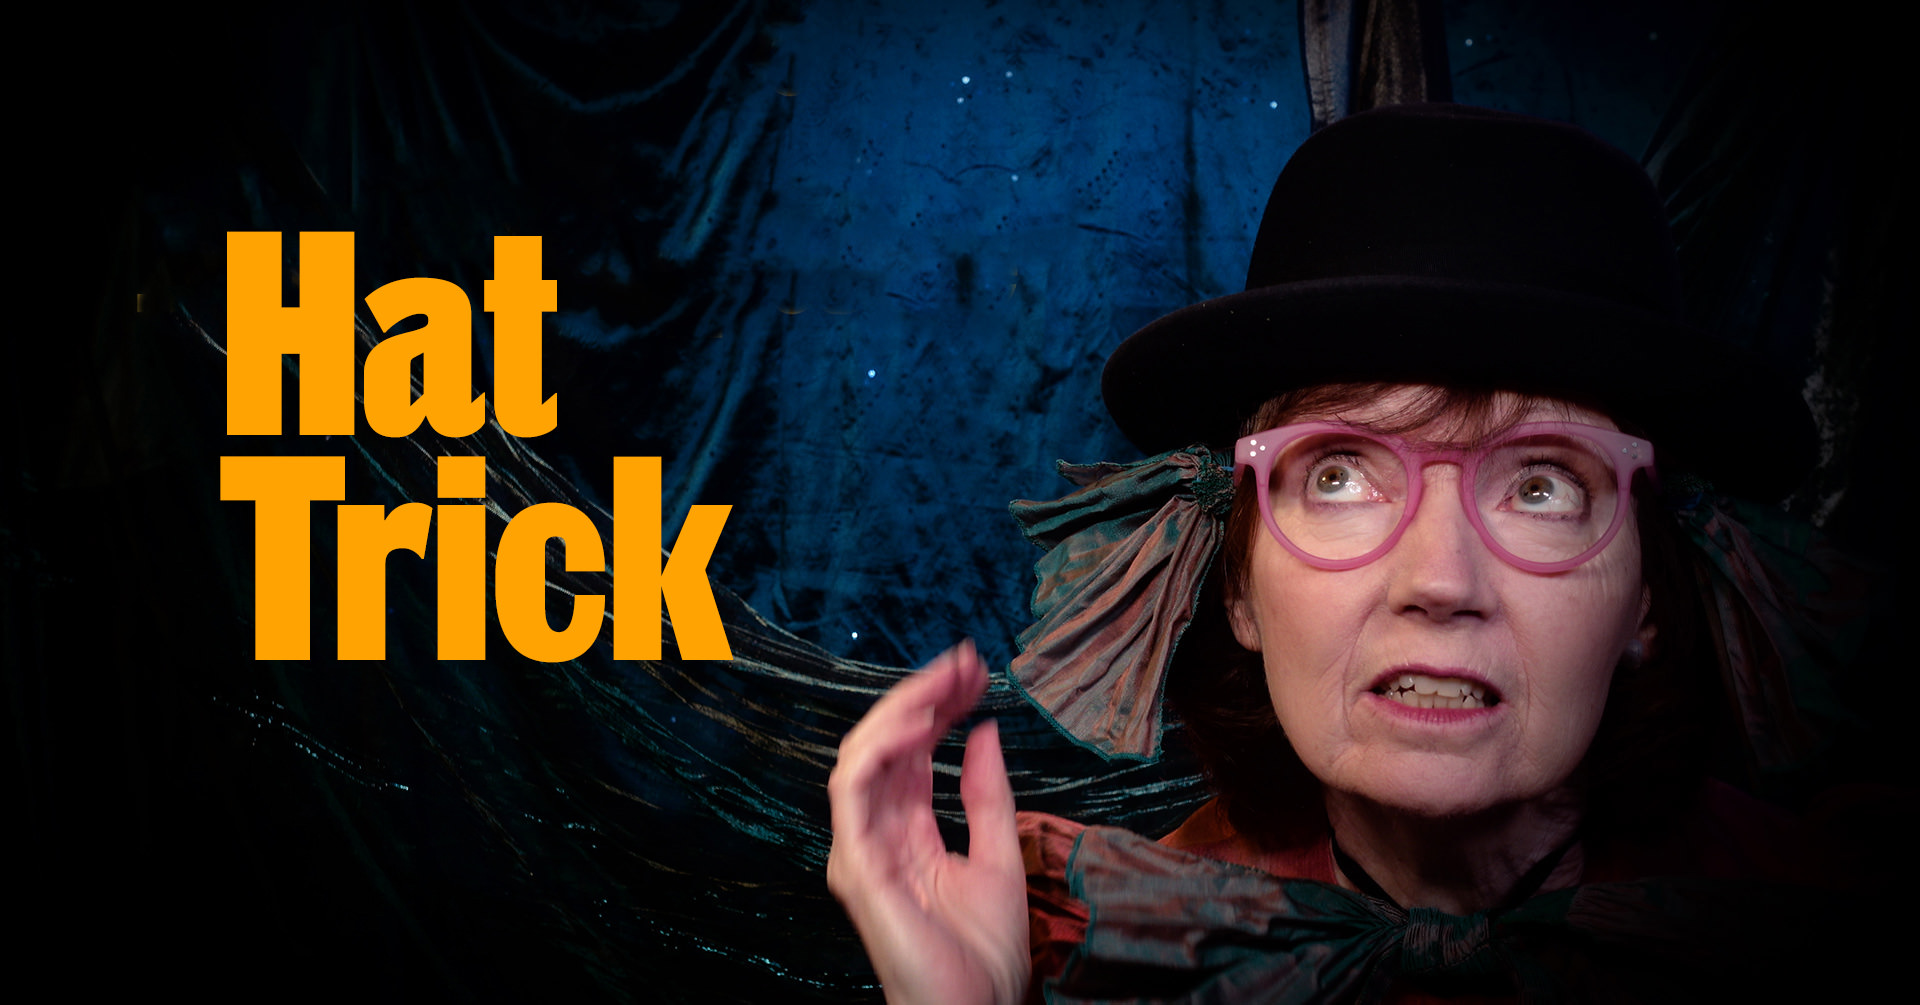 Hat Trick is written in yellow on an image of a woman wearing a black bowler hat and red glasses looks up